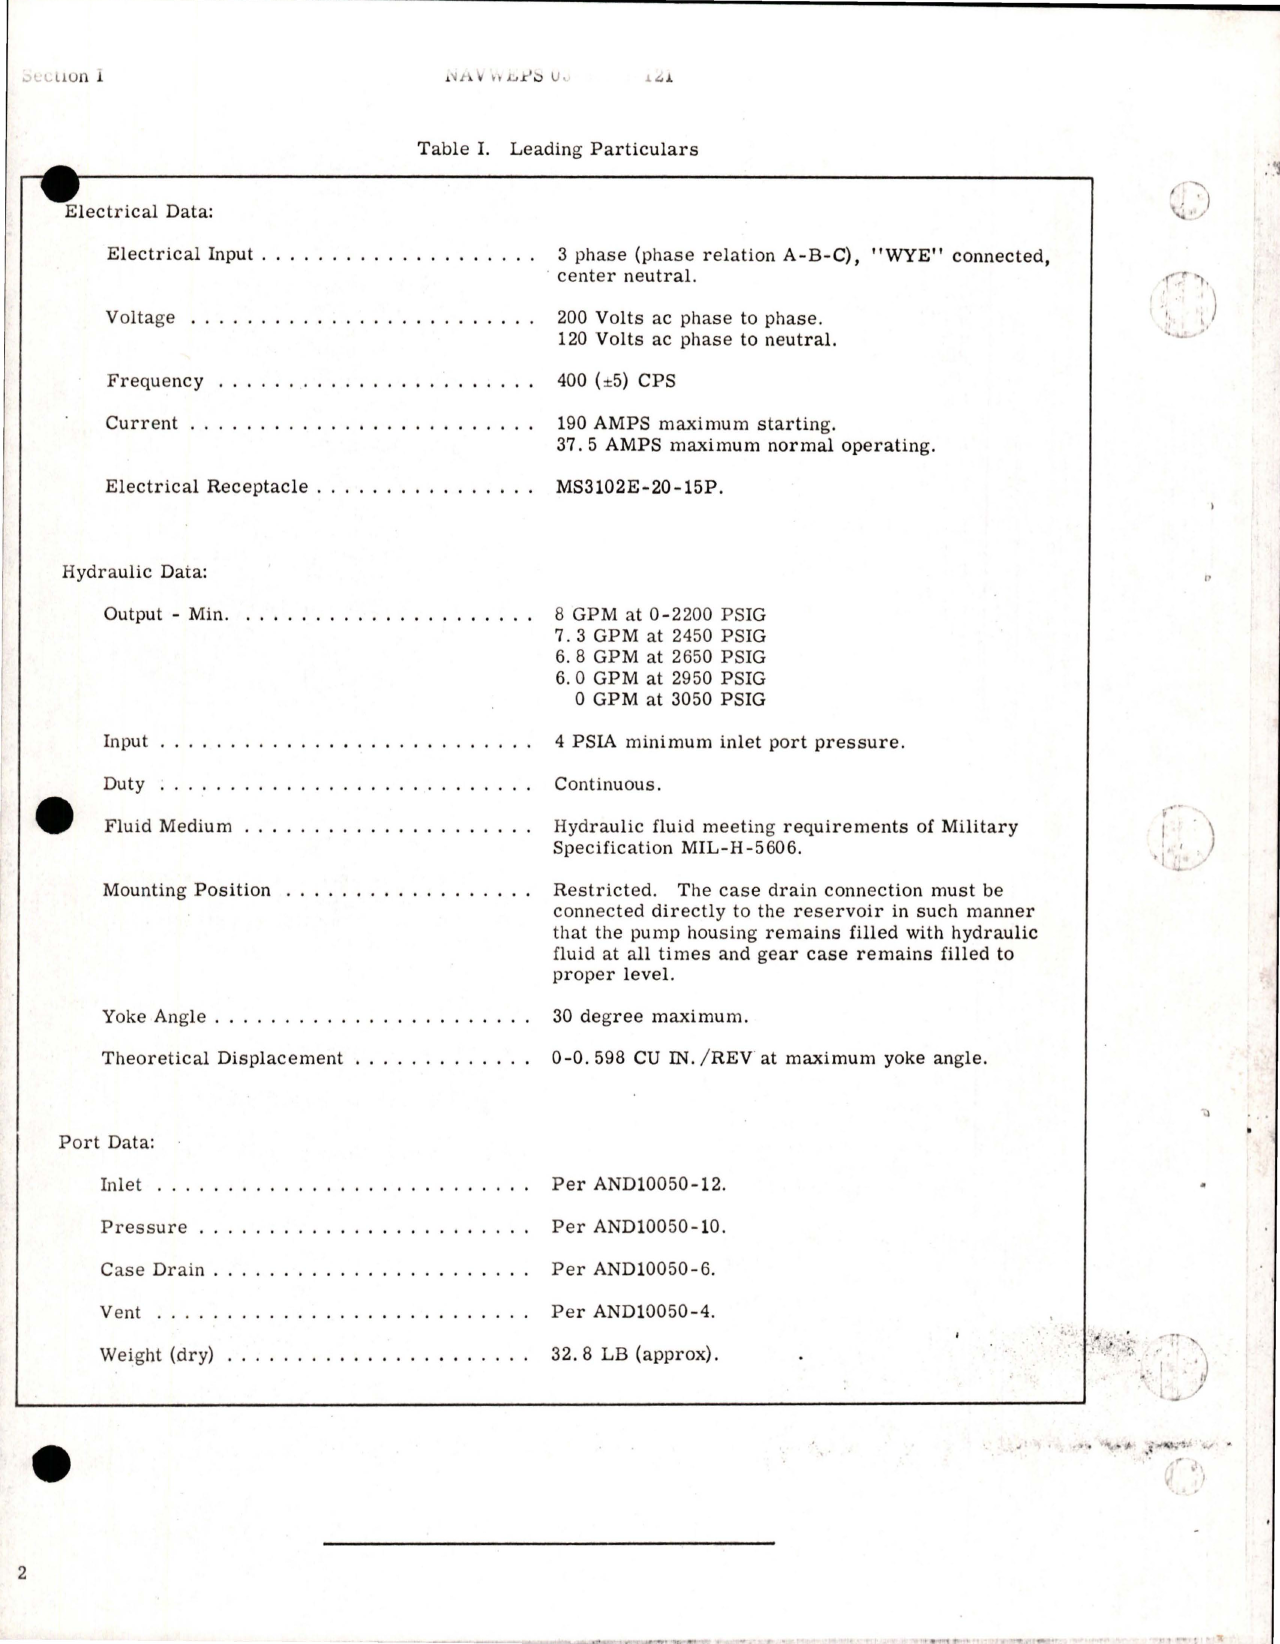 Sample page 5 from AirCorps Library document: Maintenance Instructions for Electrically Driven Hydraulic Motorpump - Models EA-1320-077, EA-1320-077C, MPEVI-060-1